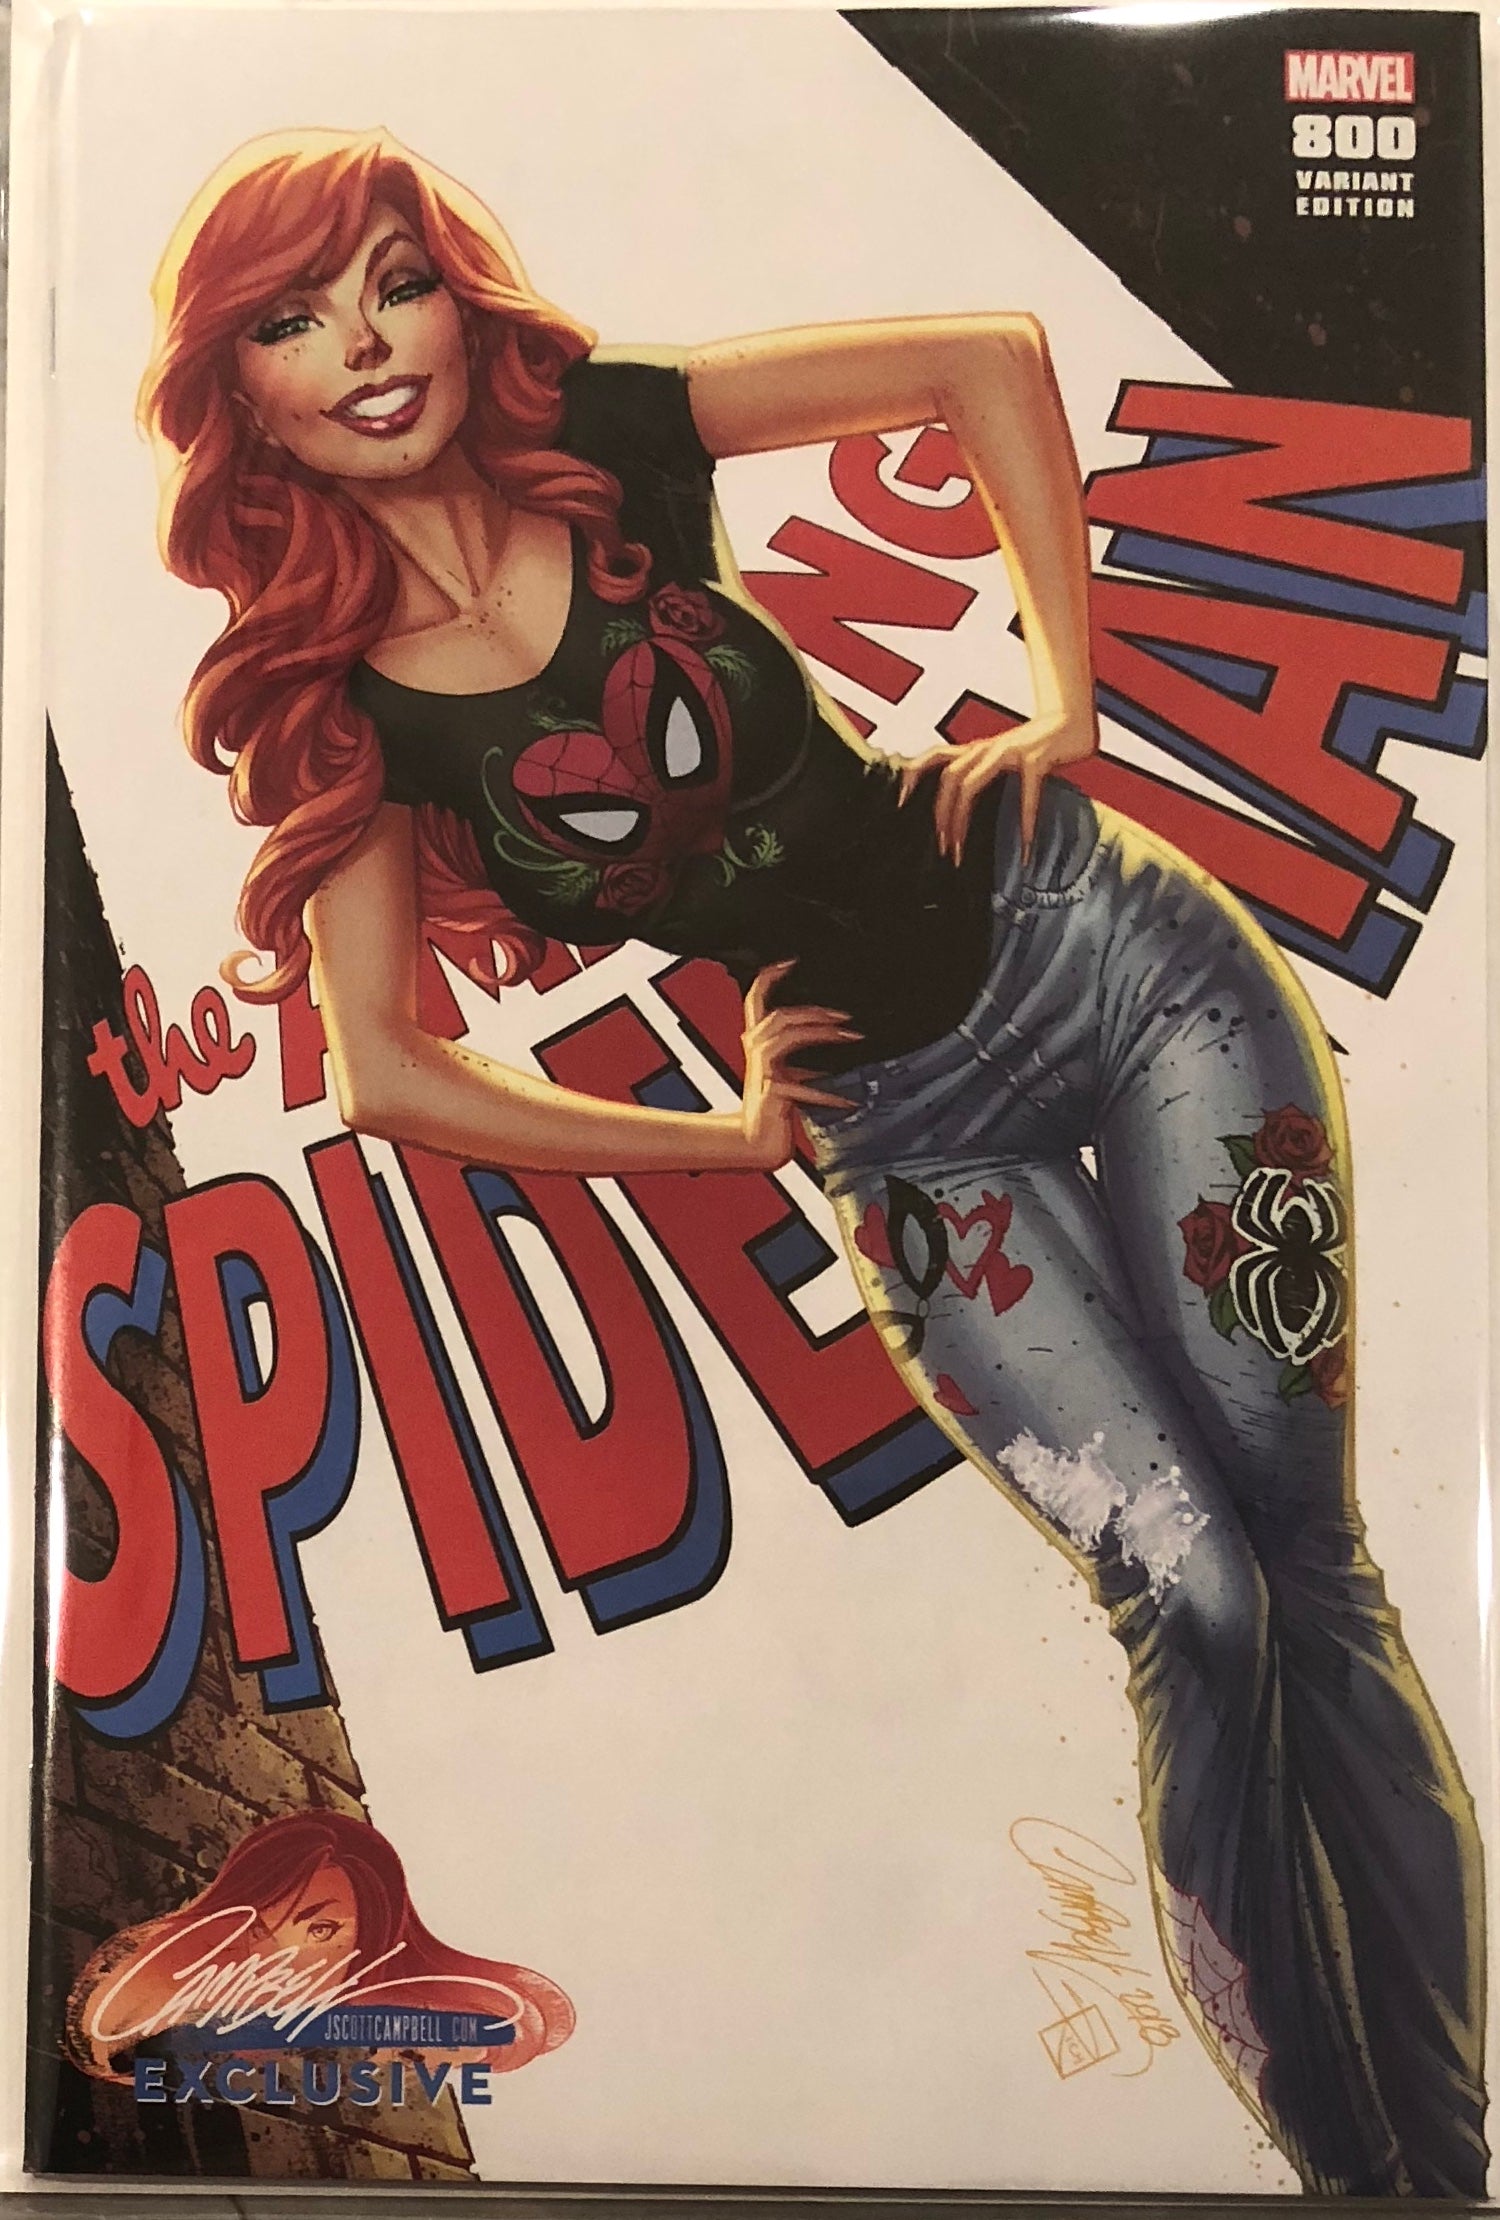 Amazing Spider-Man #800 J. Scott Campbell Edition B "Mary Jane" Exclusive